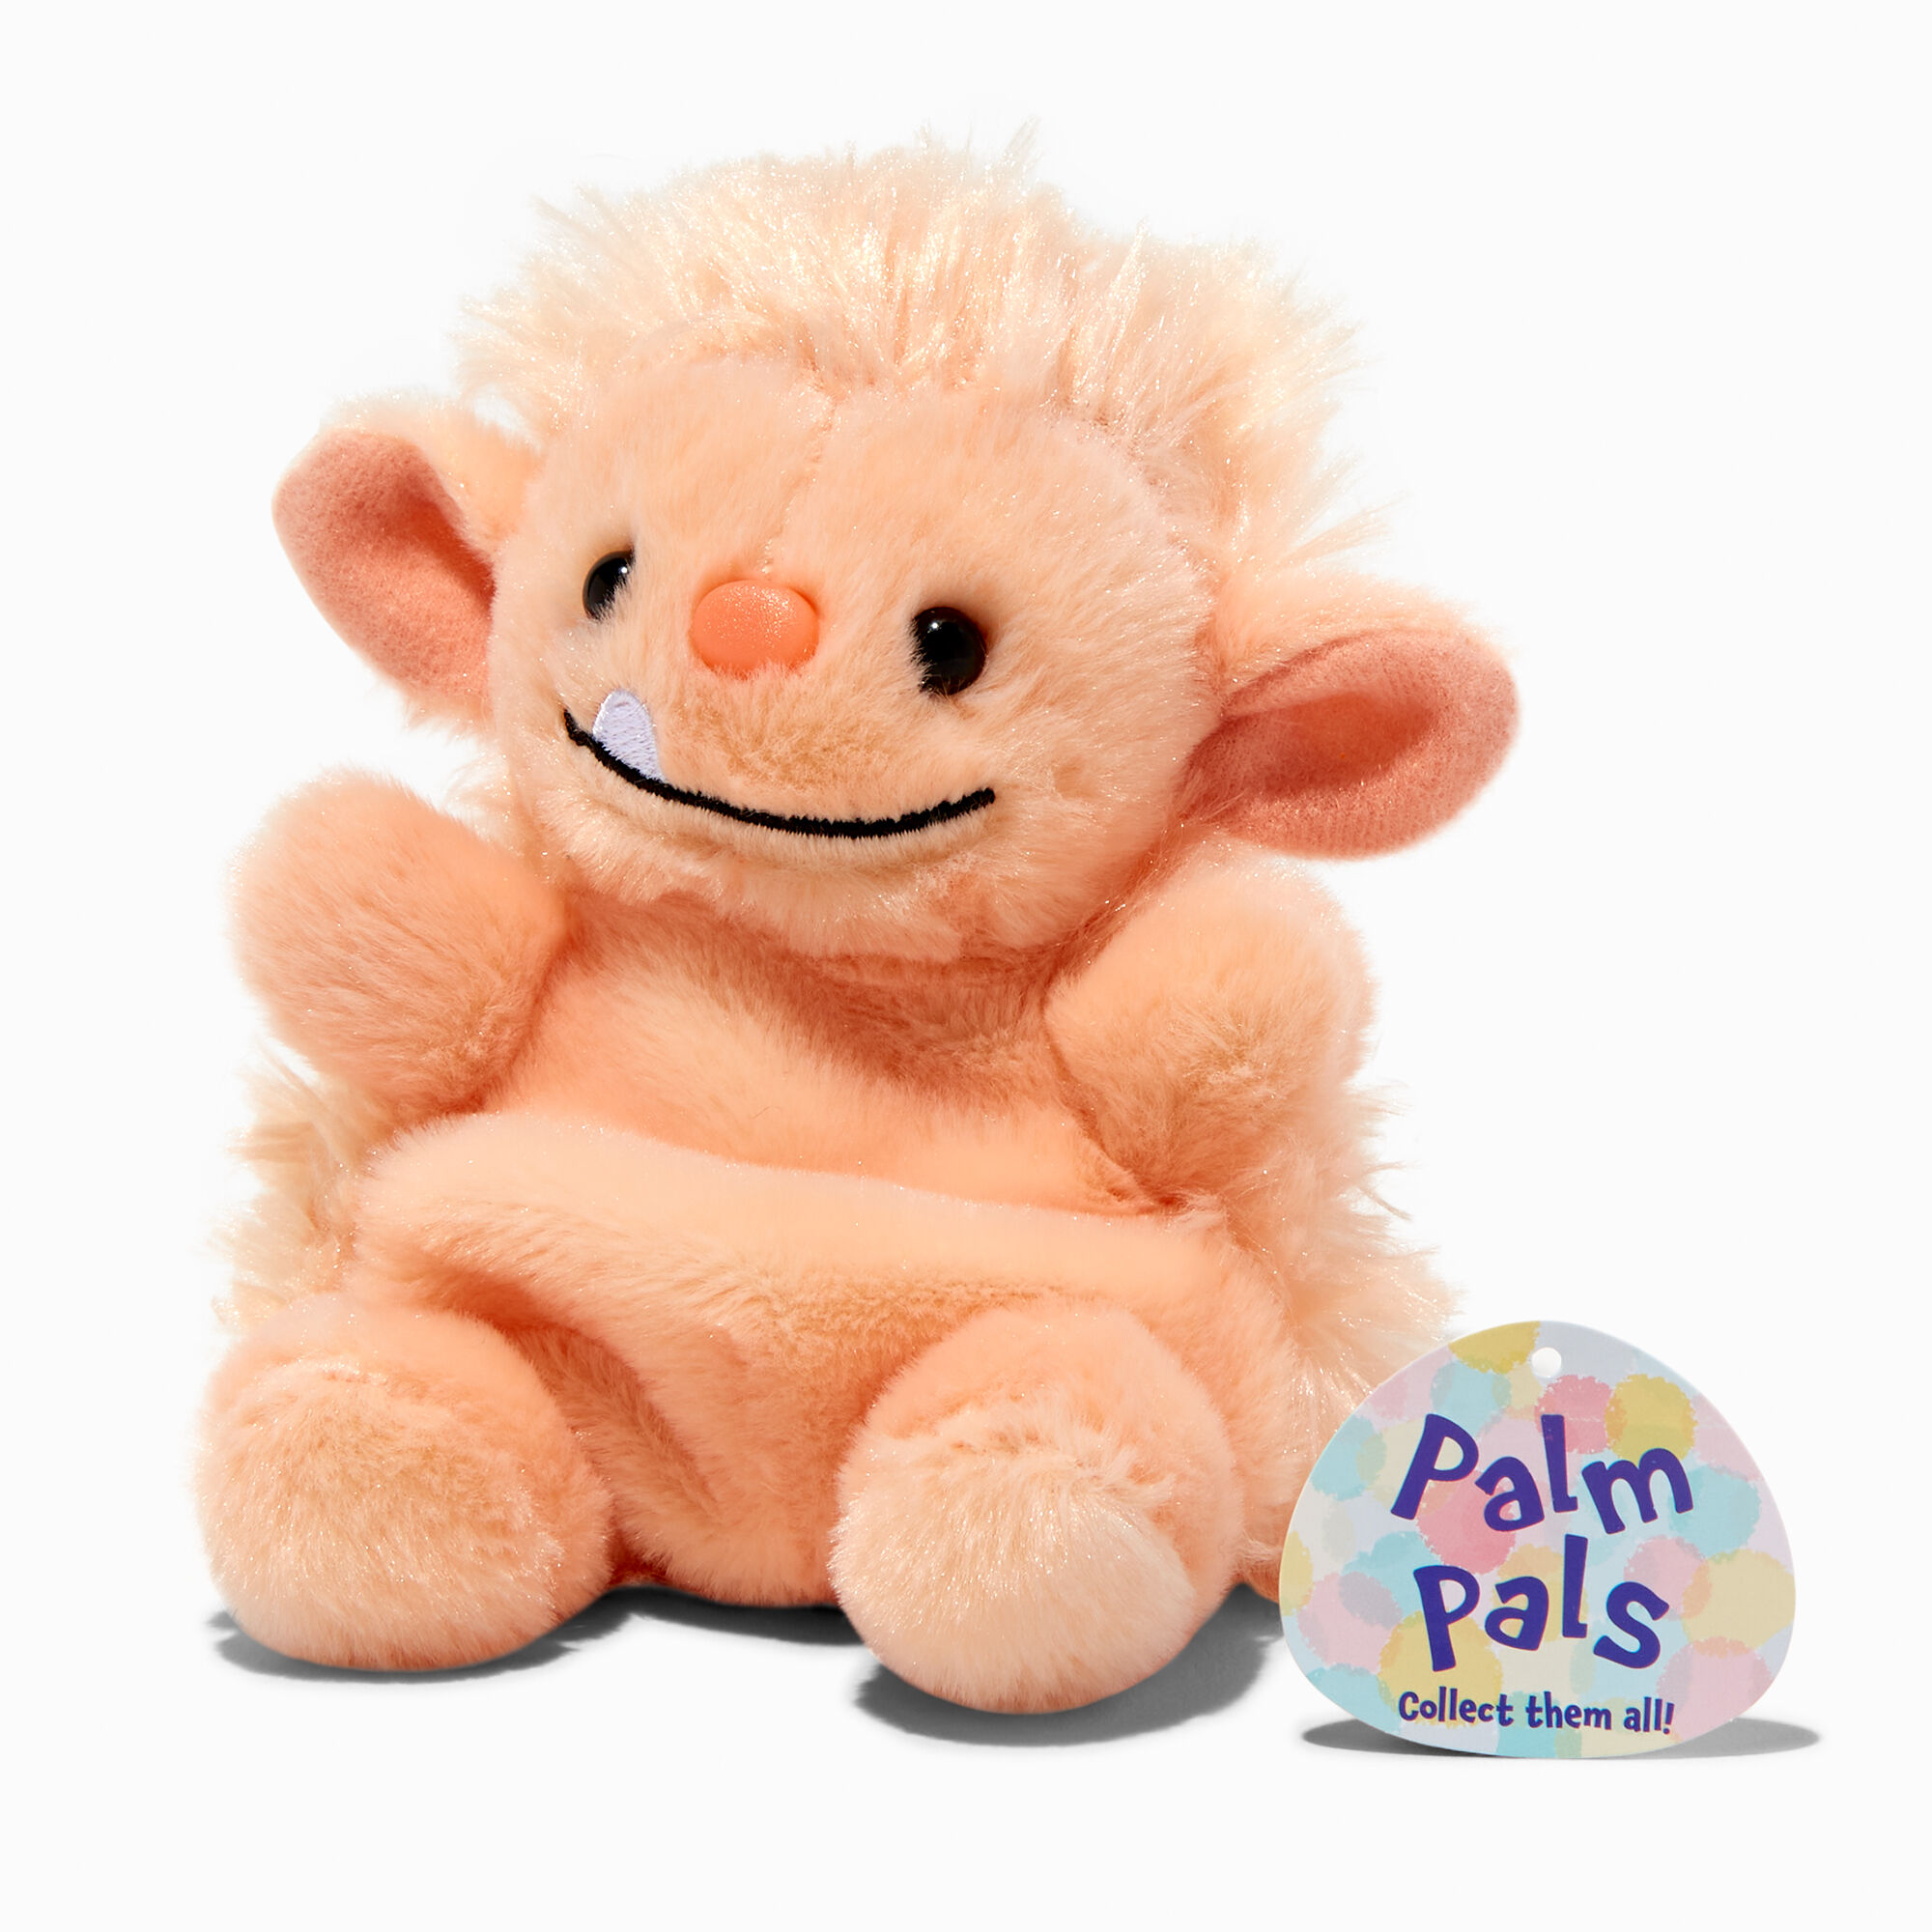 View Claires Palm Pals Moh 5 Plush Toy information